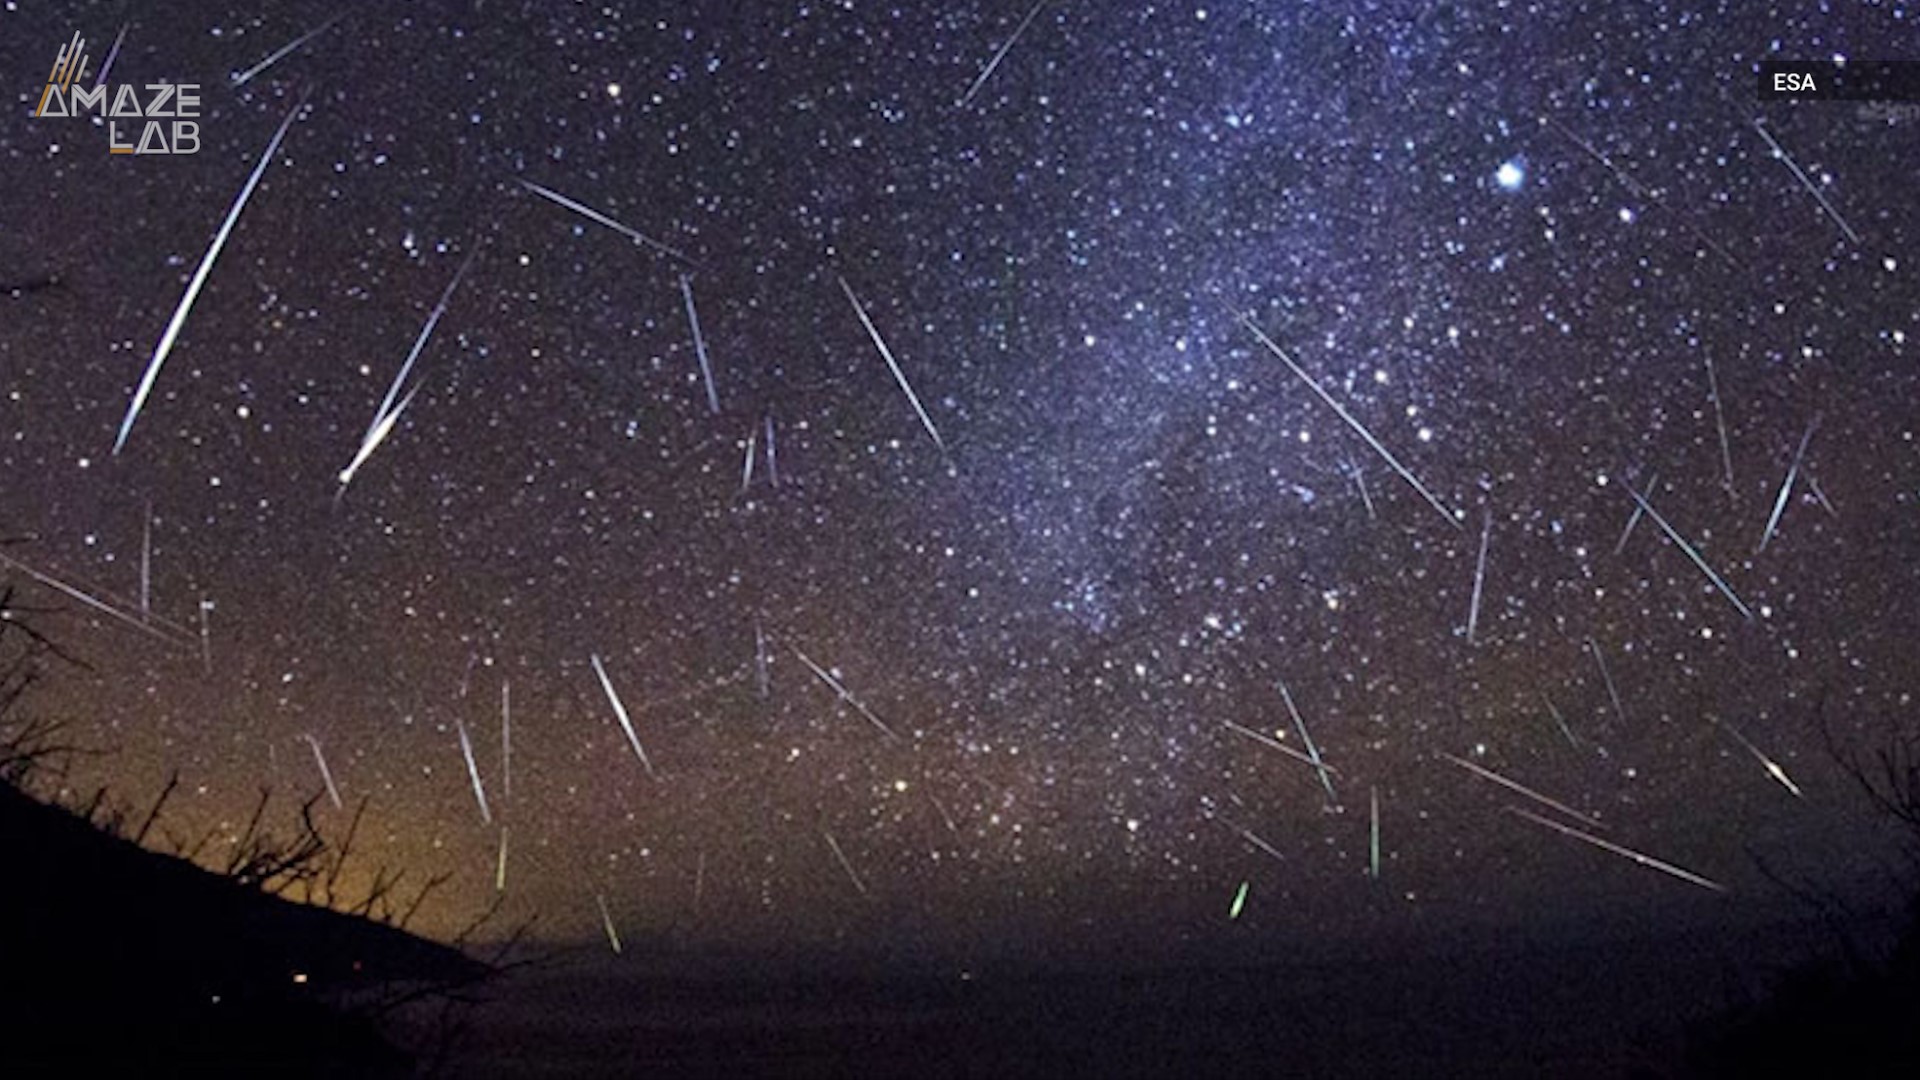 When does the meteor shower peak?